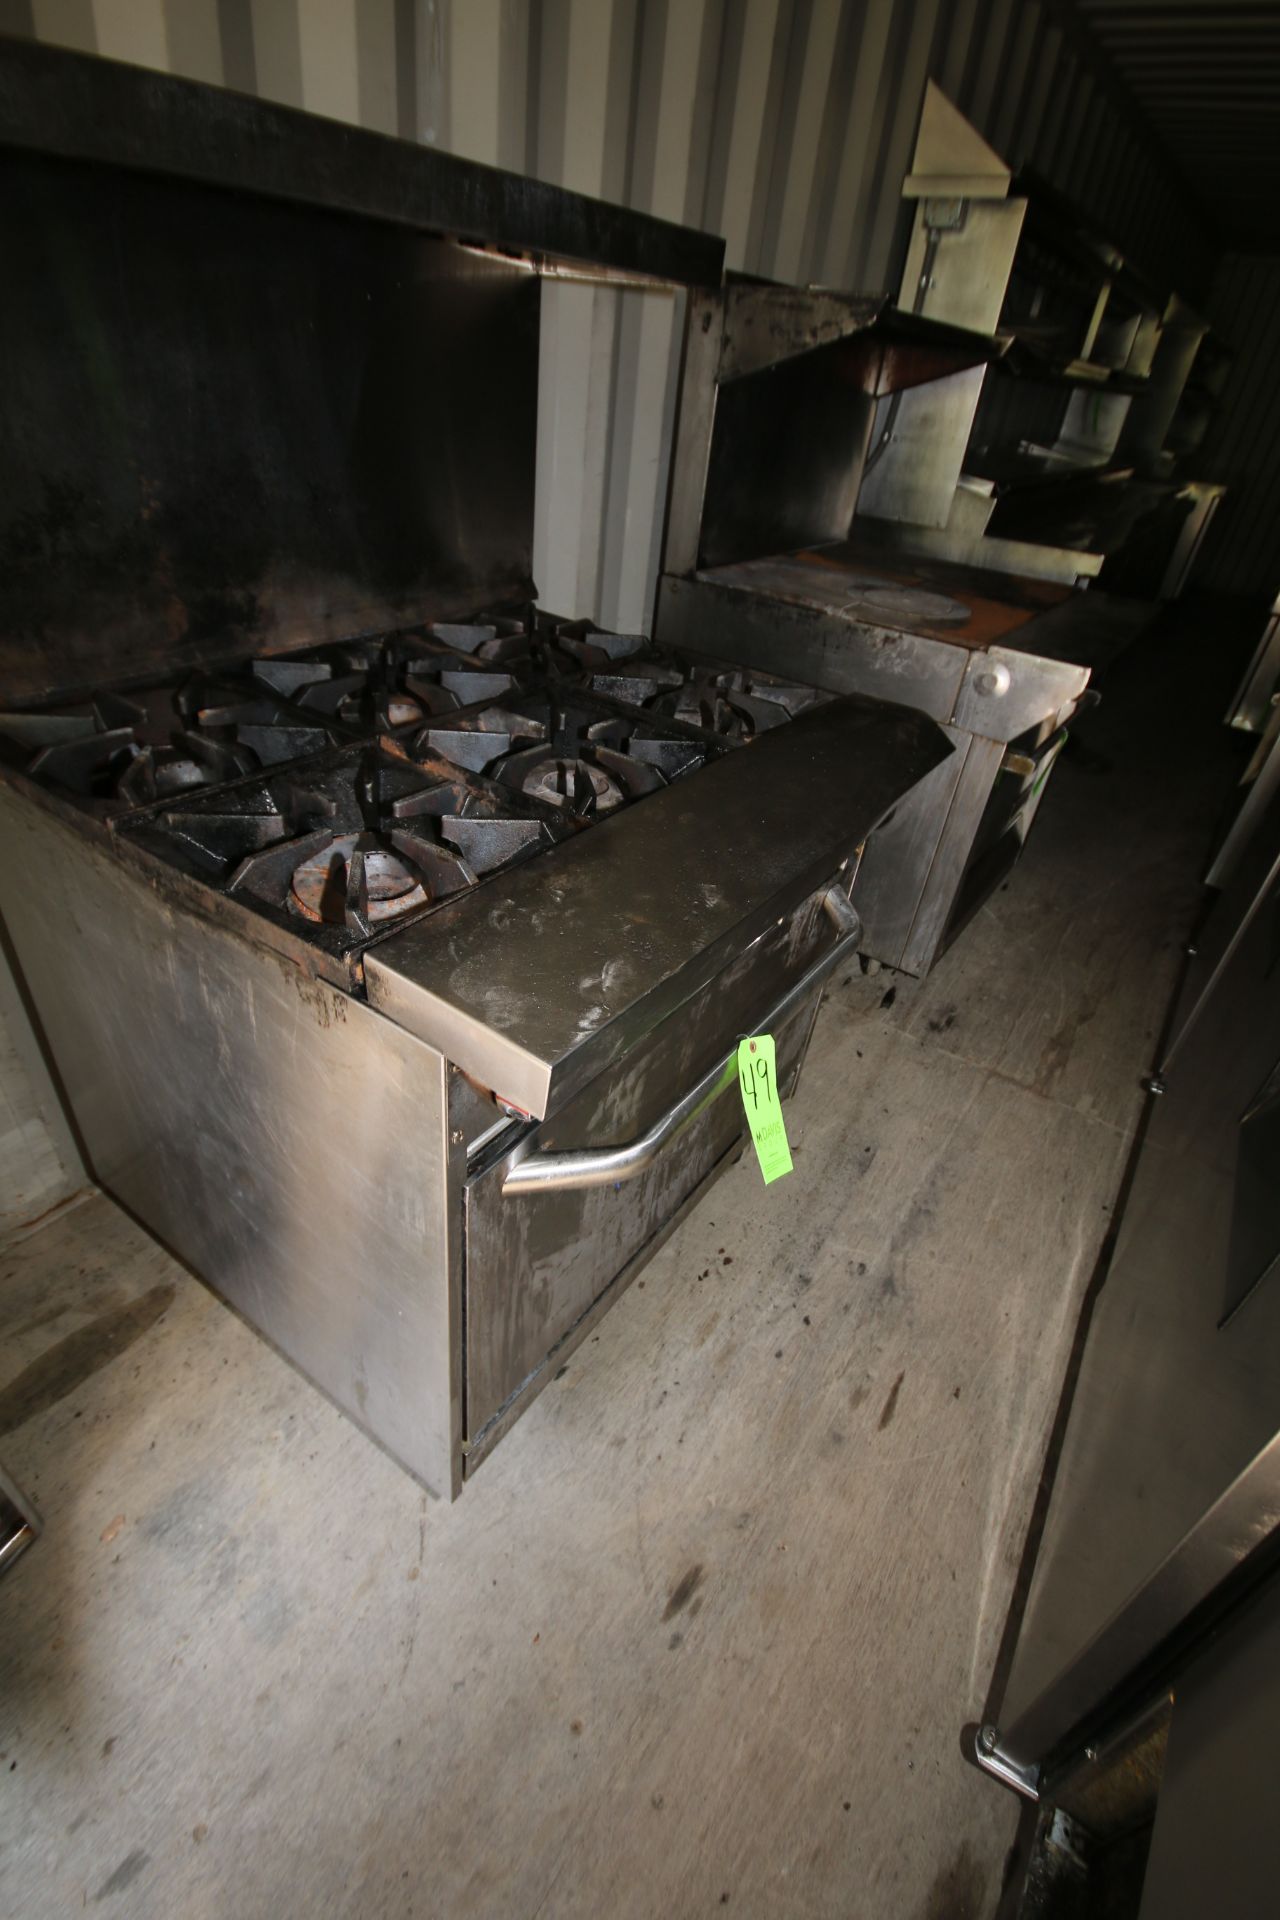 Bakers Pride 8-Burner Stove, with Bottom Oven and Racks, Natural Gas Operated - Image 2 of 4